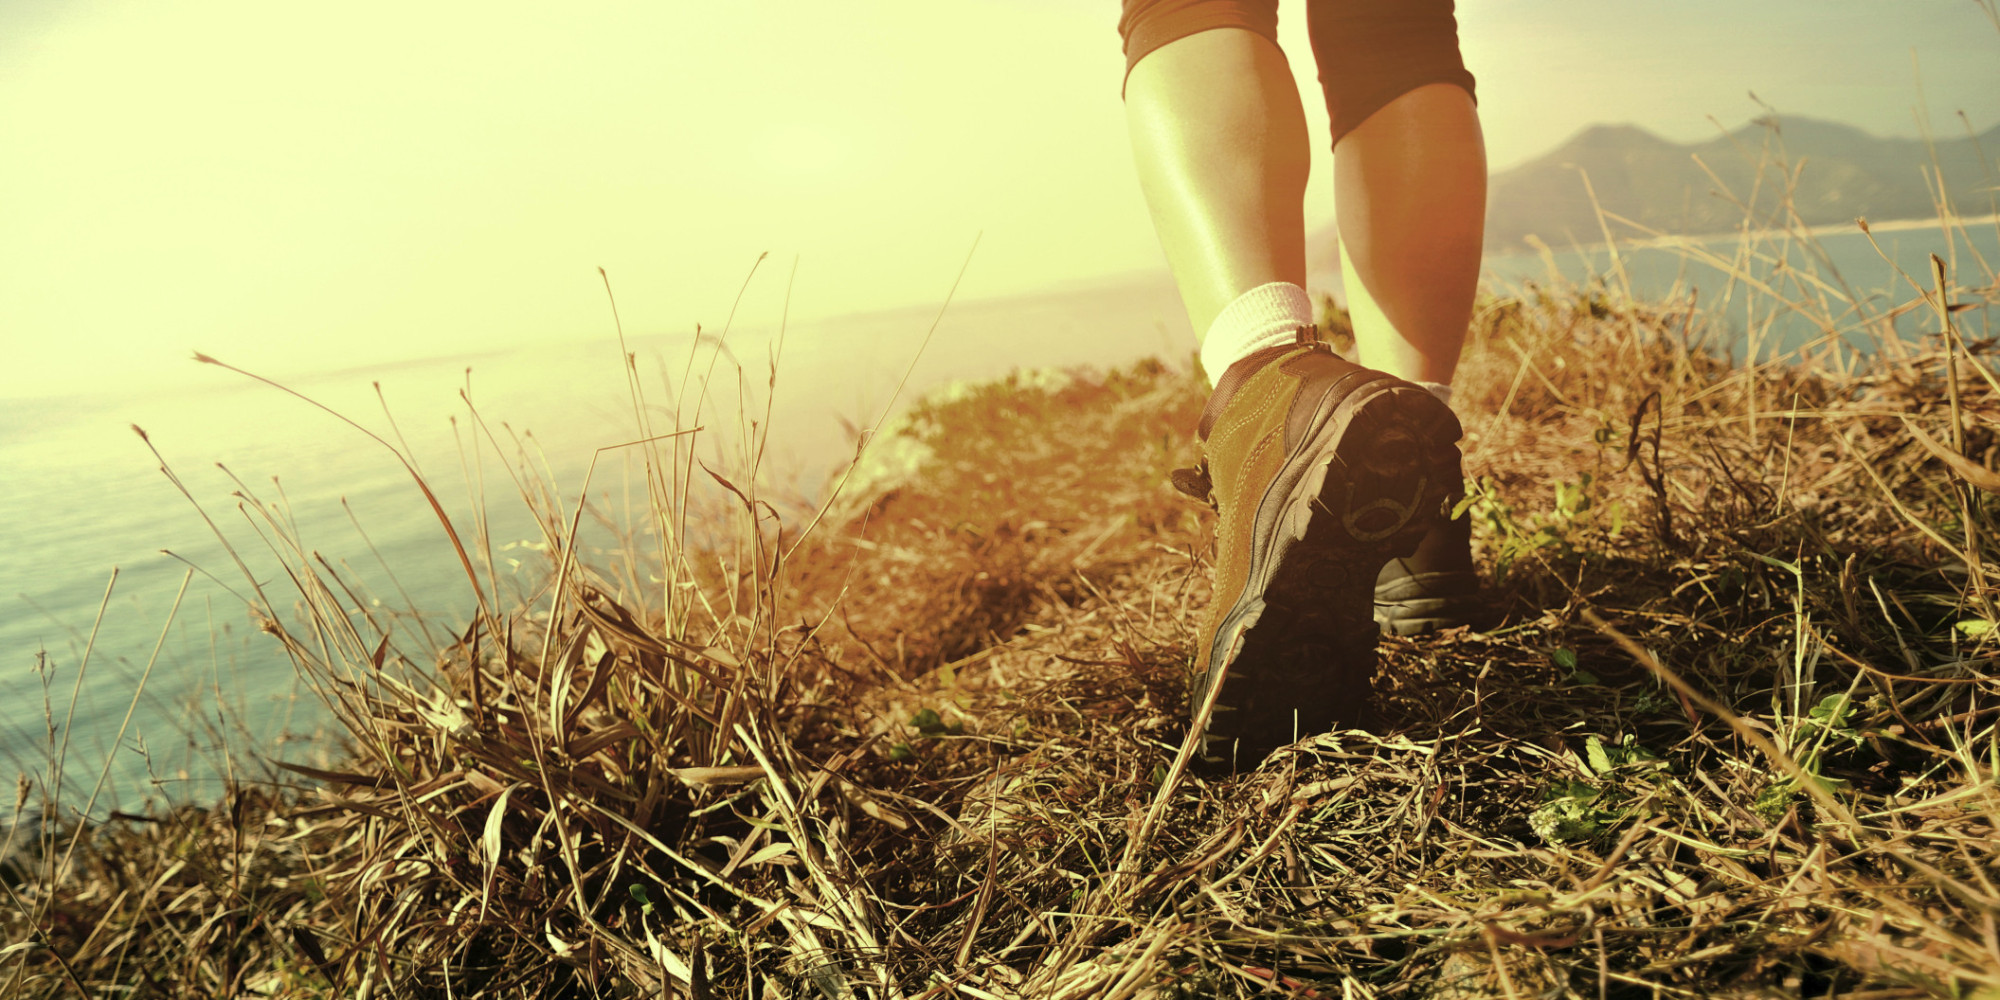 17 Literary Quotes About The Joy Of Walking | HuffPost